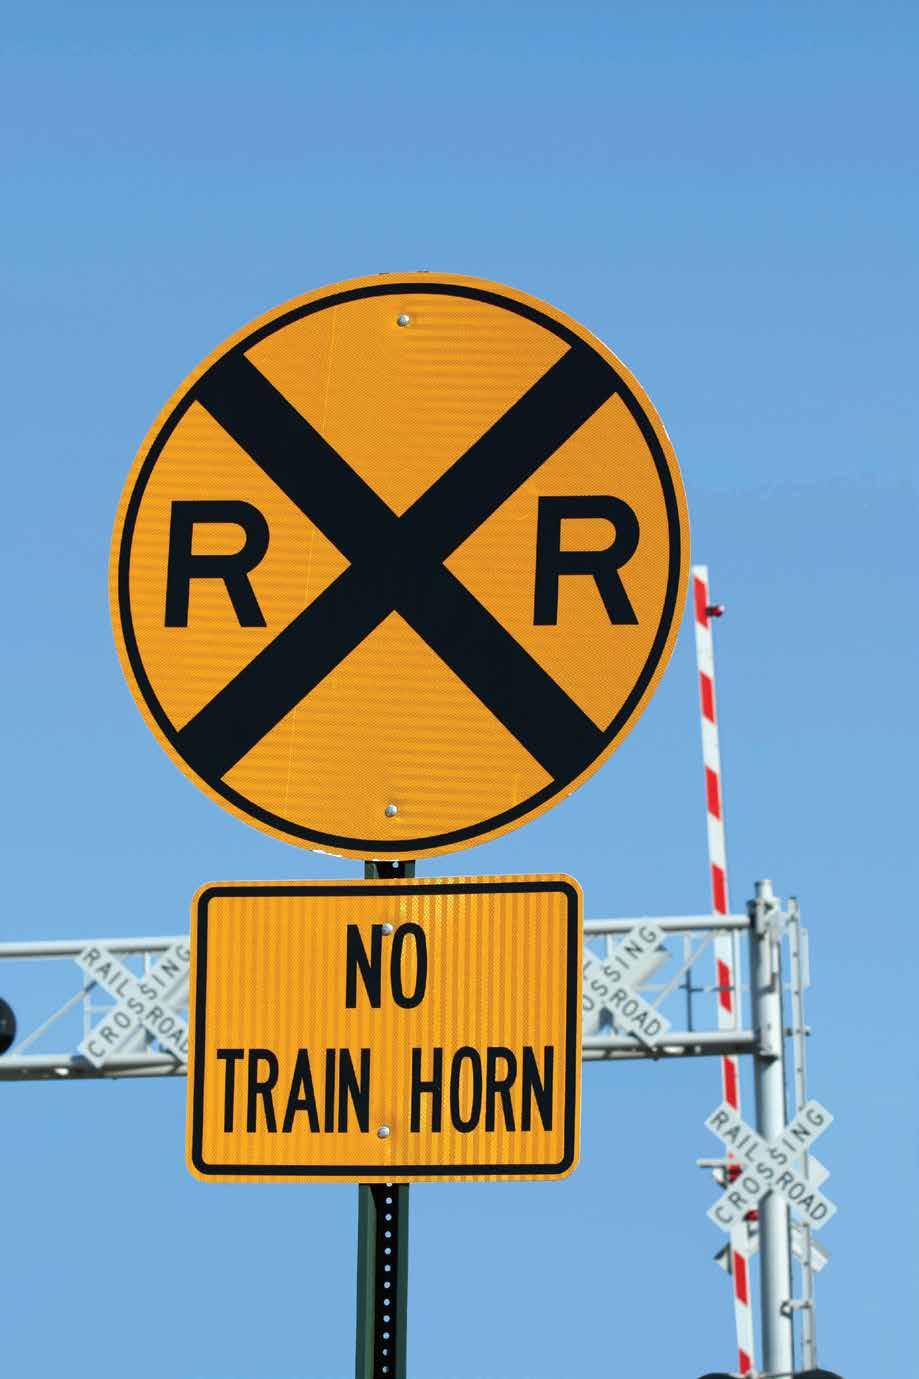 Train Horns STANDARD POLICY Railroad engineers will begin to sound train horns at least 15 seconds, and no more than 20 seconds, in advance of all public grade crossings.